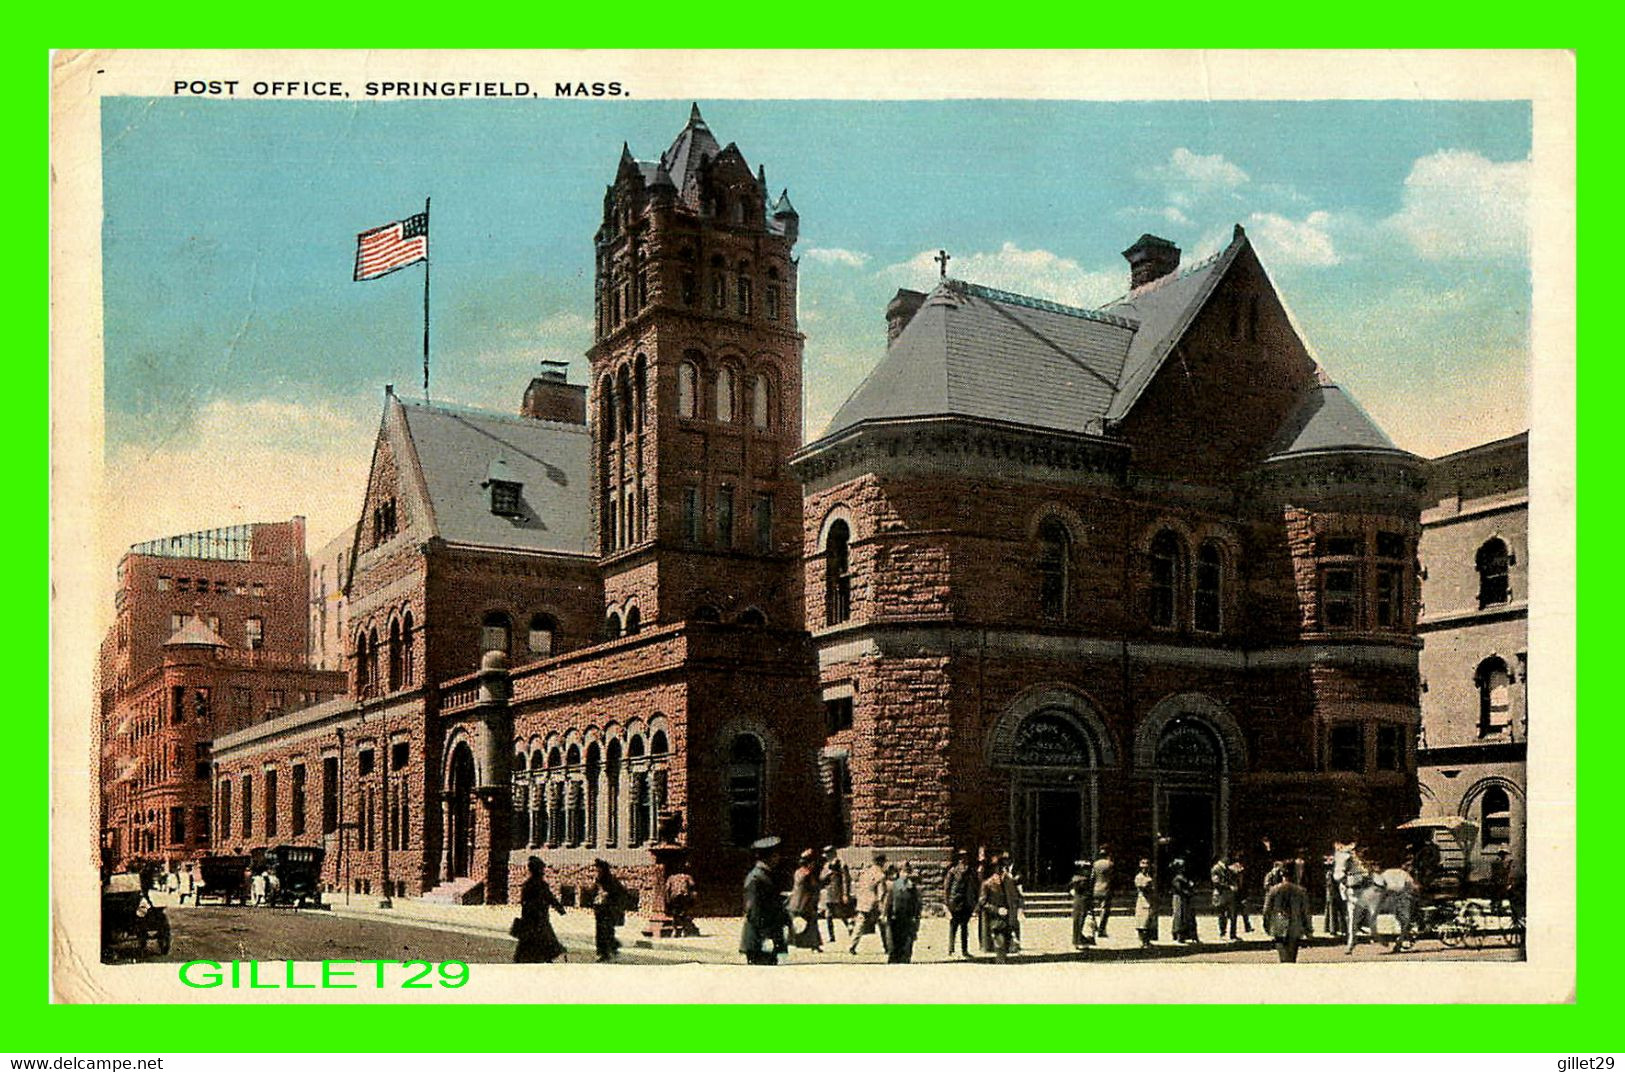 SPRINGFIELD, MA - POST OFFICE - ANIMATED WITH PEOPLES - TICHNOR BROS INC - - Springfield